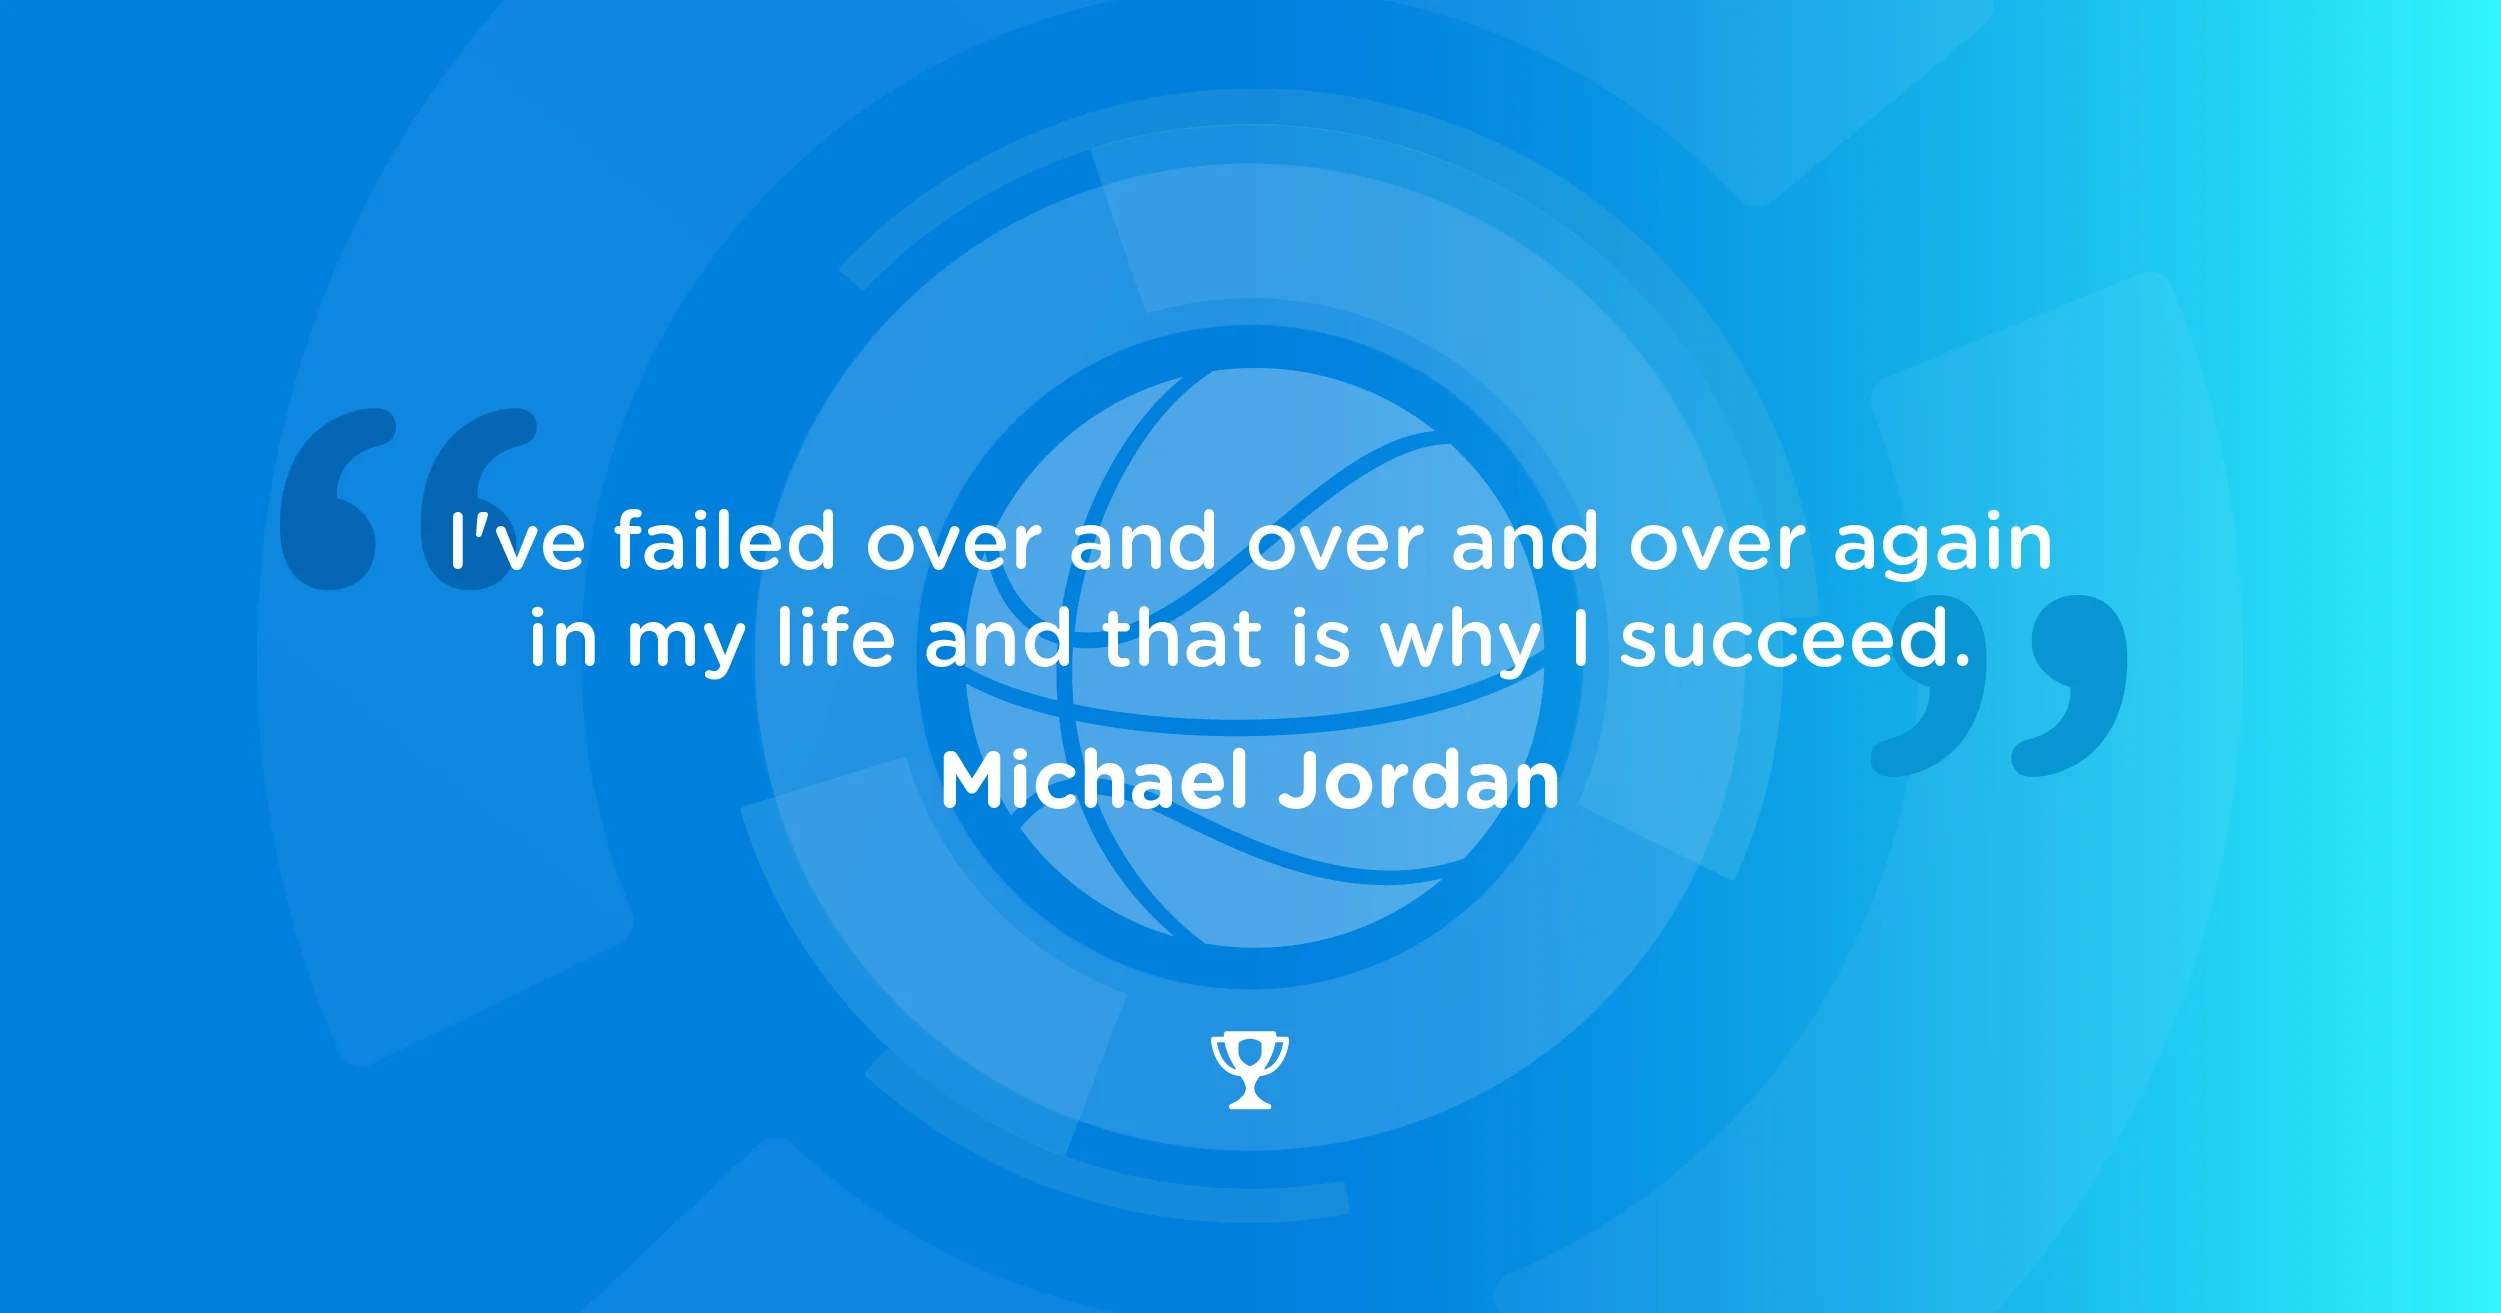 michael jordan youth sports quote i've failed over and over and over again in my life and that is why i succeed